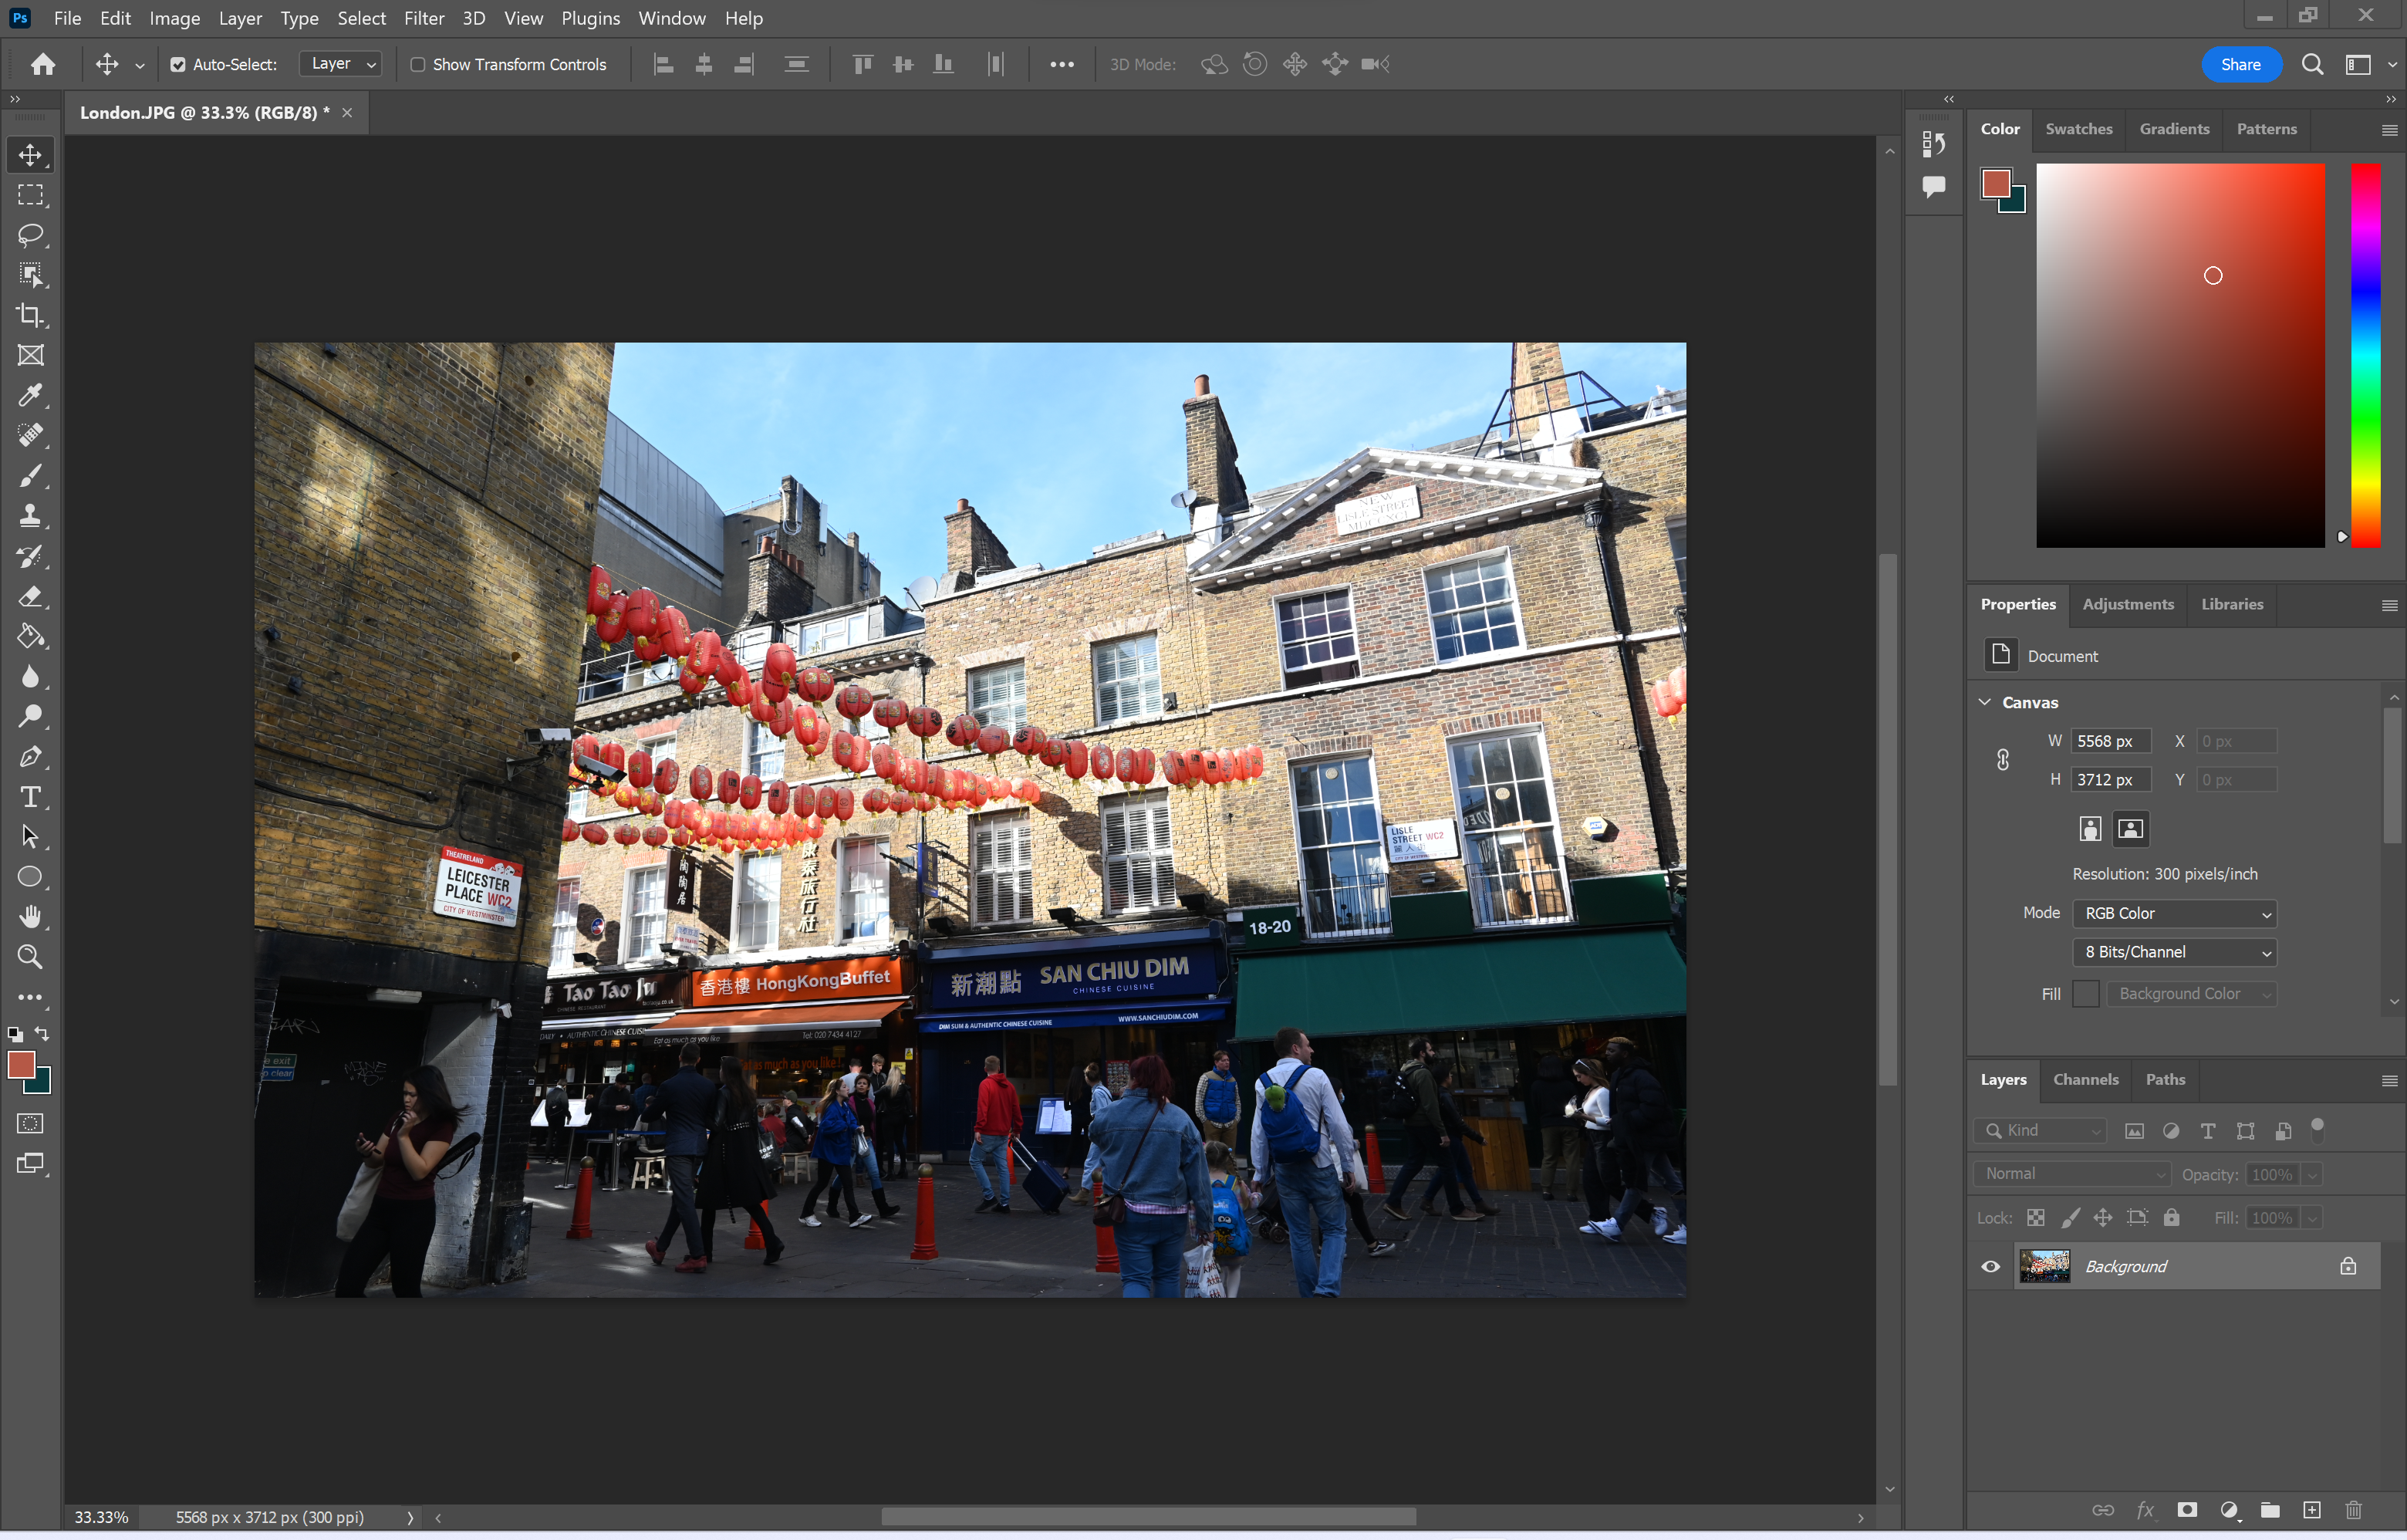 How to use sky replacement in Photoshop